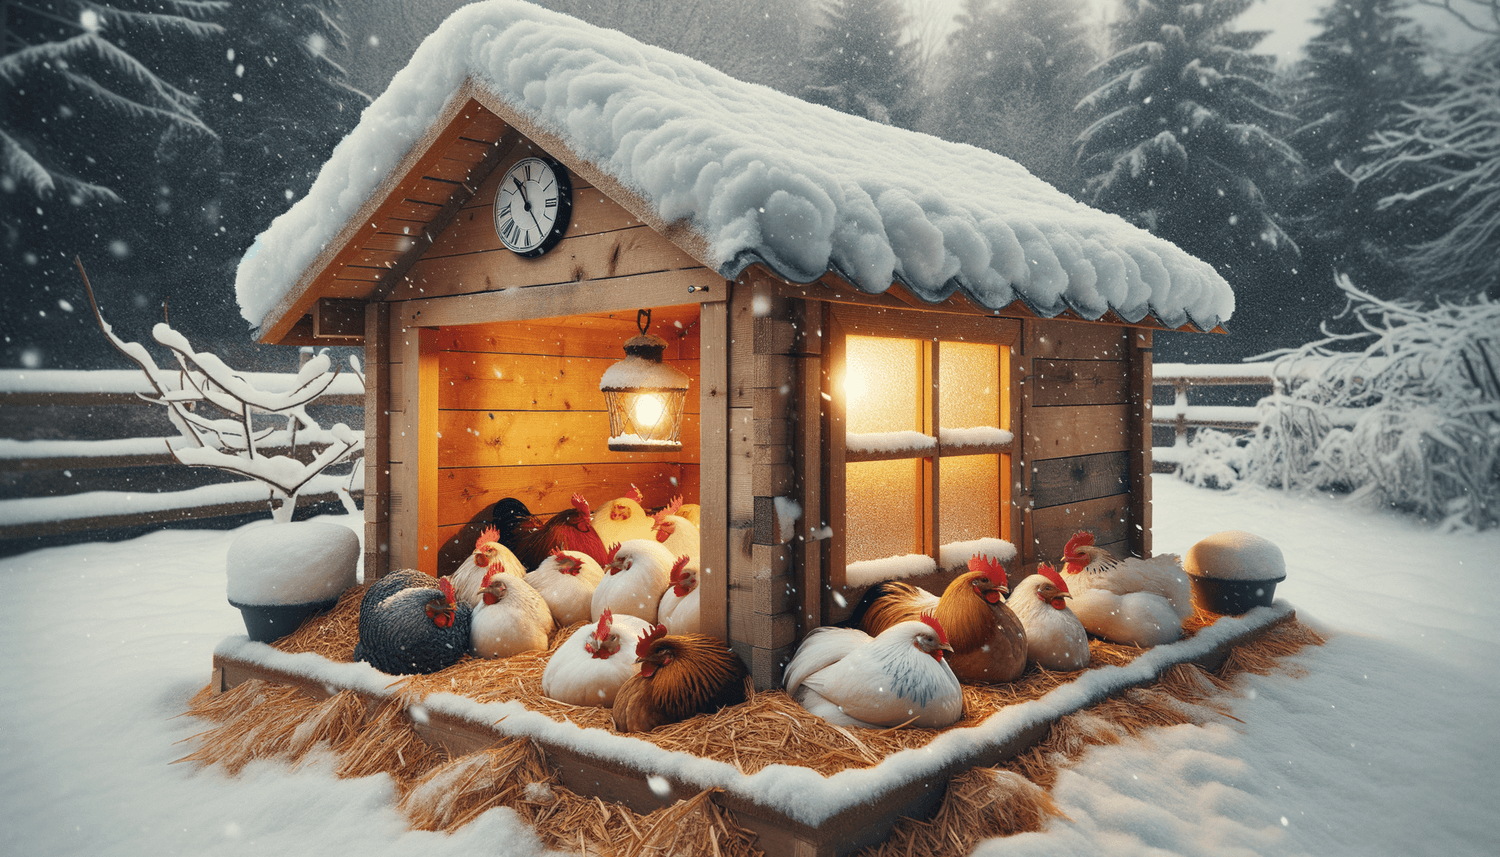 How Cold is Too Cold for Chickens?